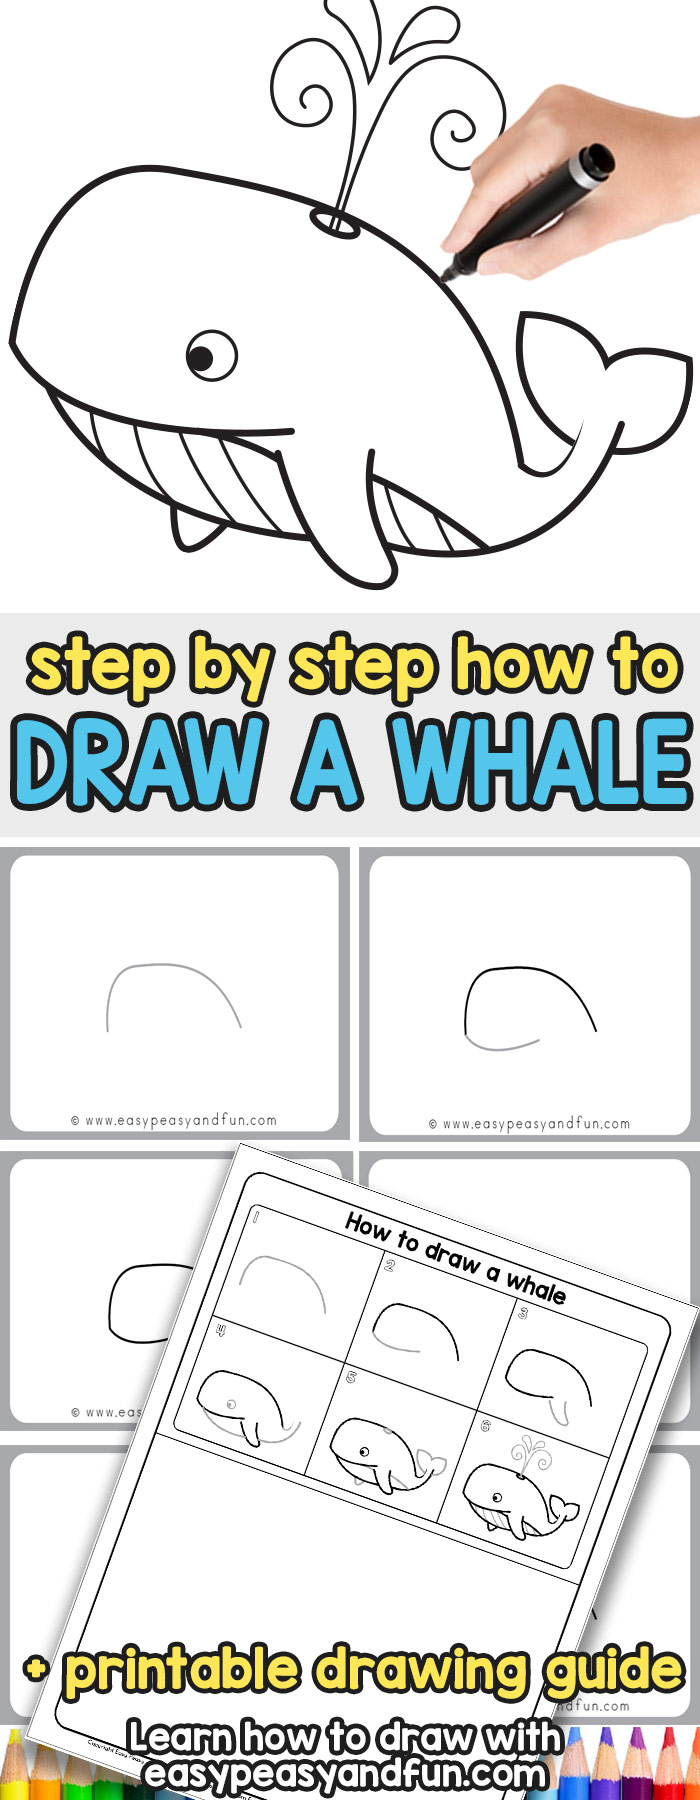 How to Draw a Whale Step by Step (cartoon style) - Easy Peasy and Fun